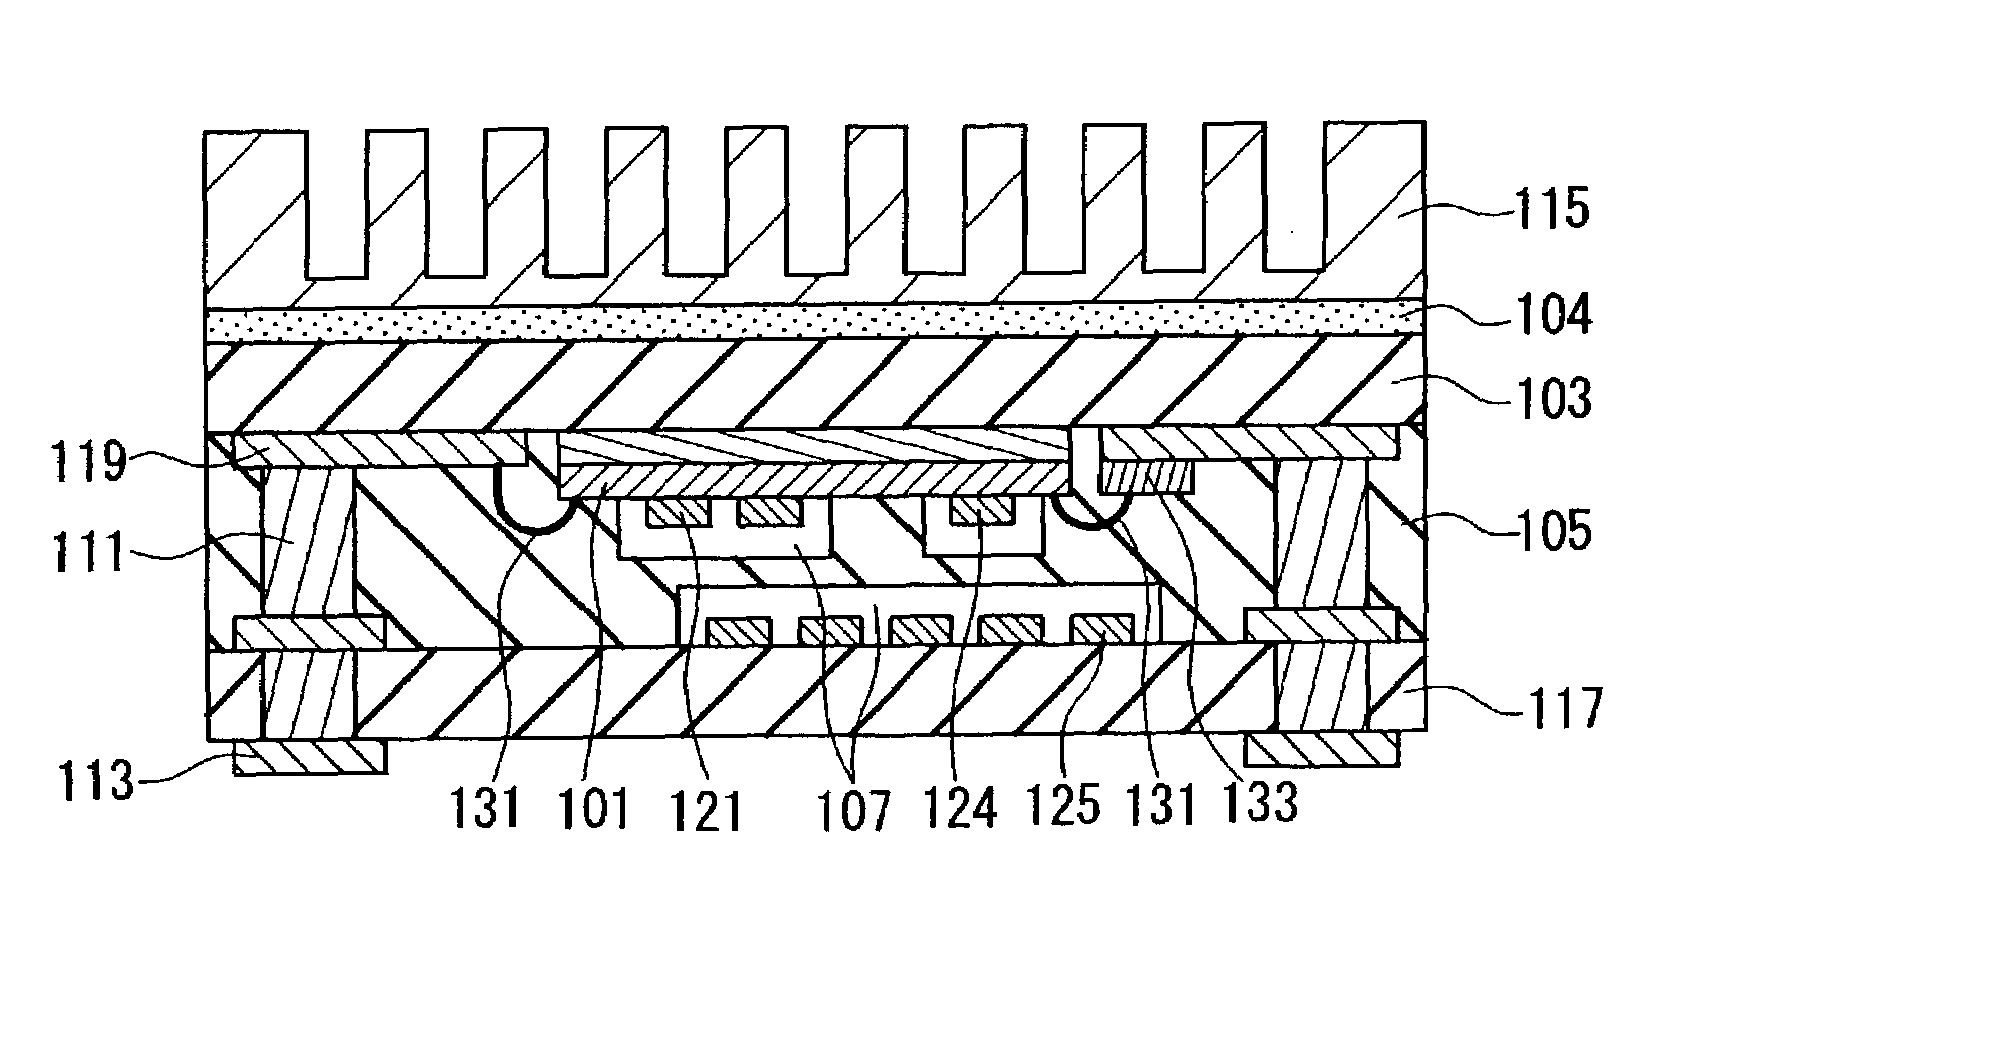 Semiconductor built-in millimeter-wave band module